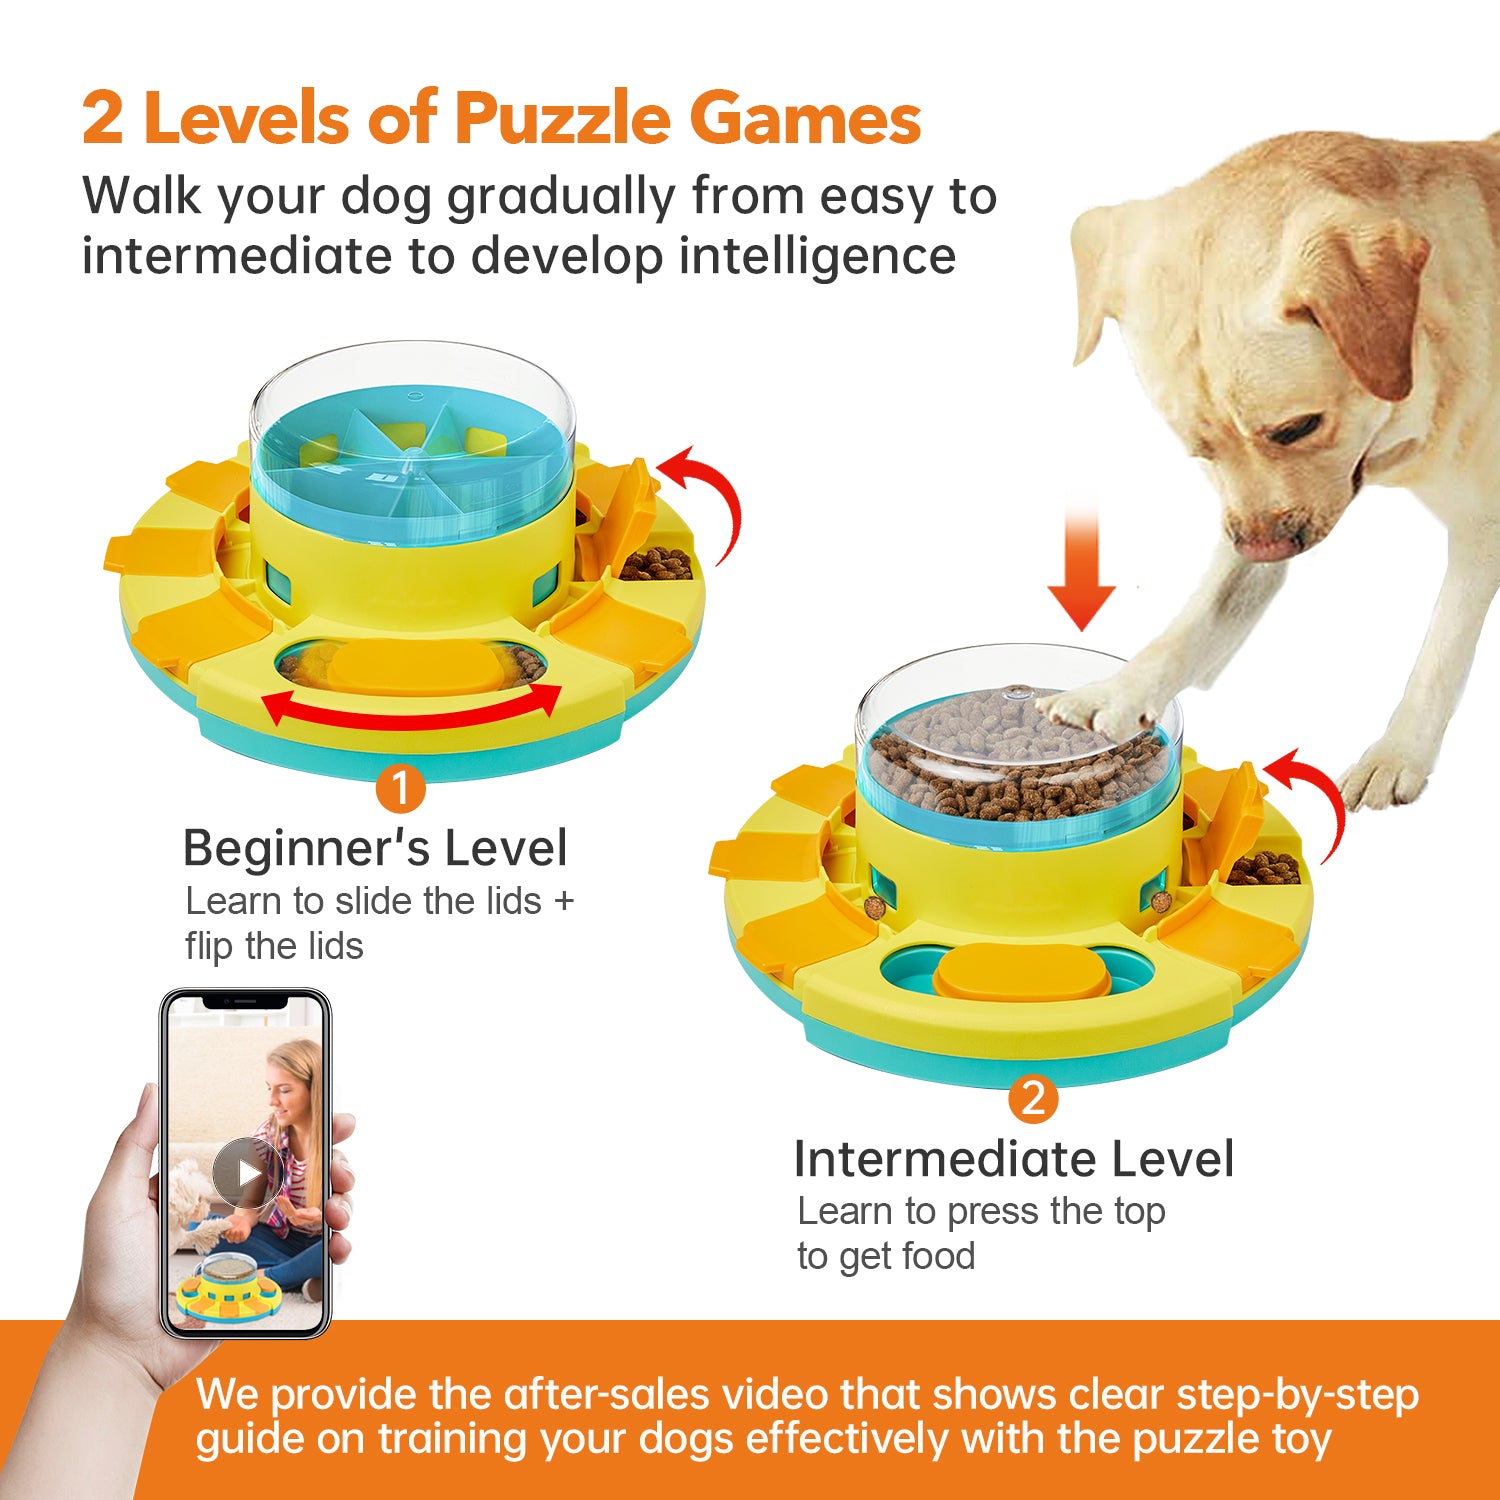 Dog Puzzle Toys, Dog Puzzles for Smart Dogs, Puppy Puzzle Toys